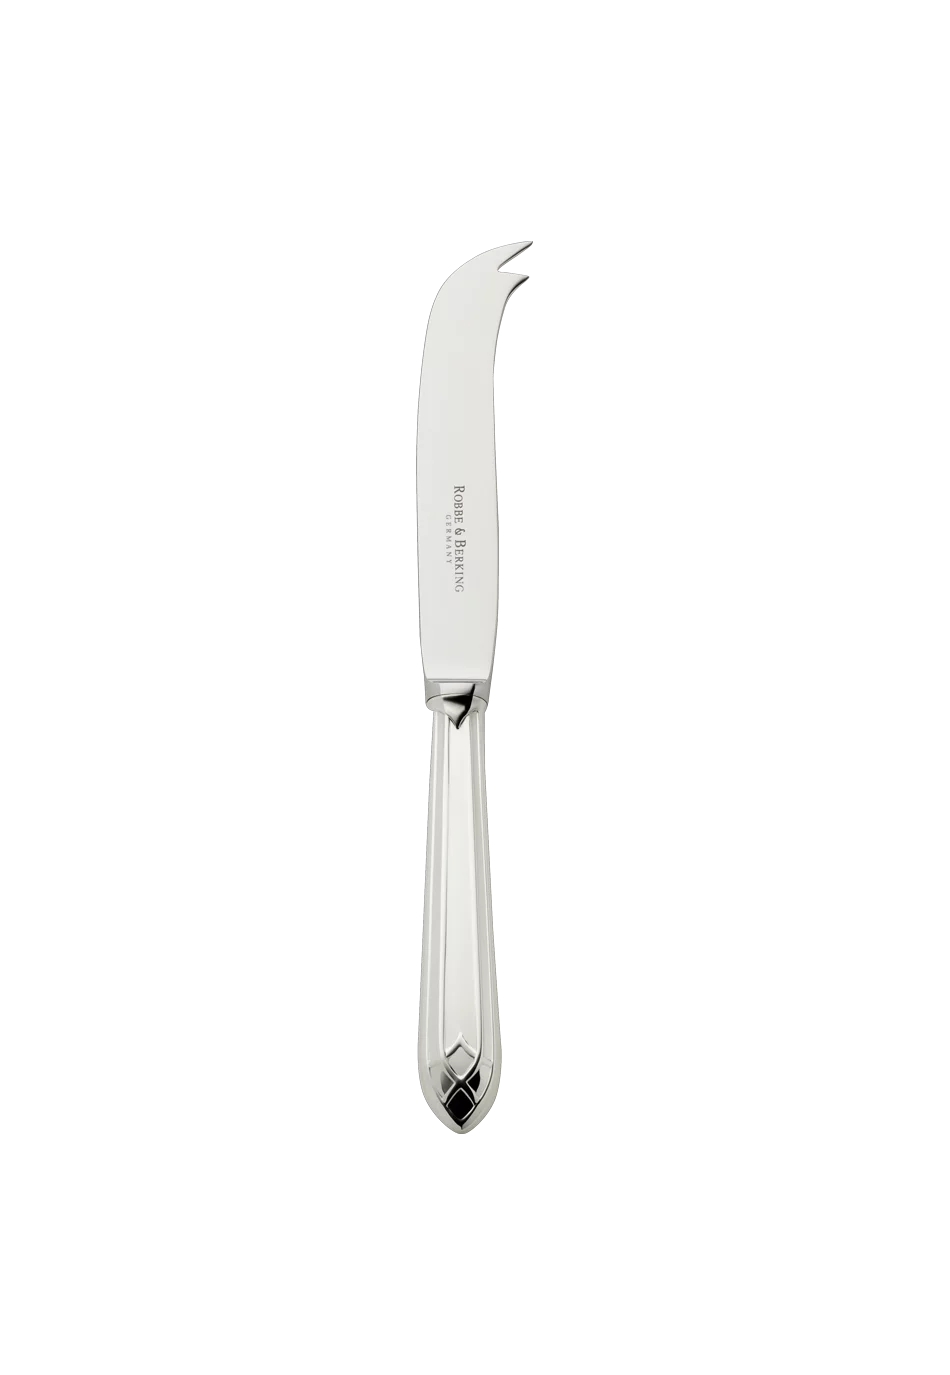 Arcade Cheese Knife (925 Sterling Silver)